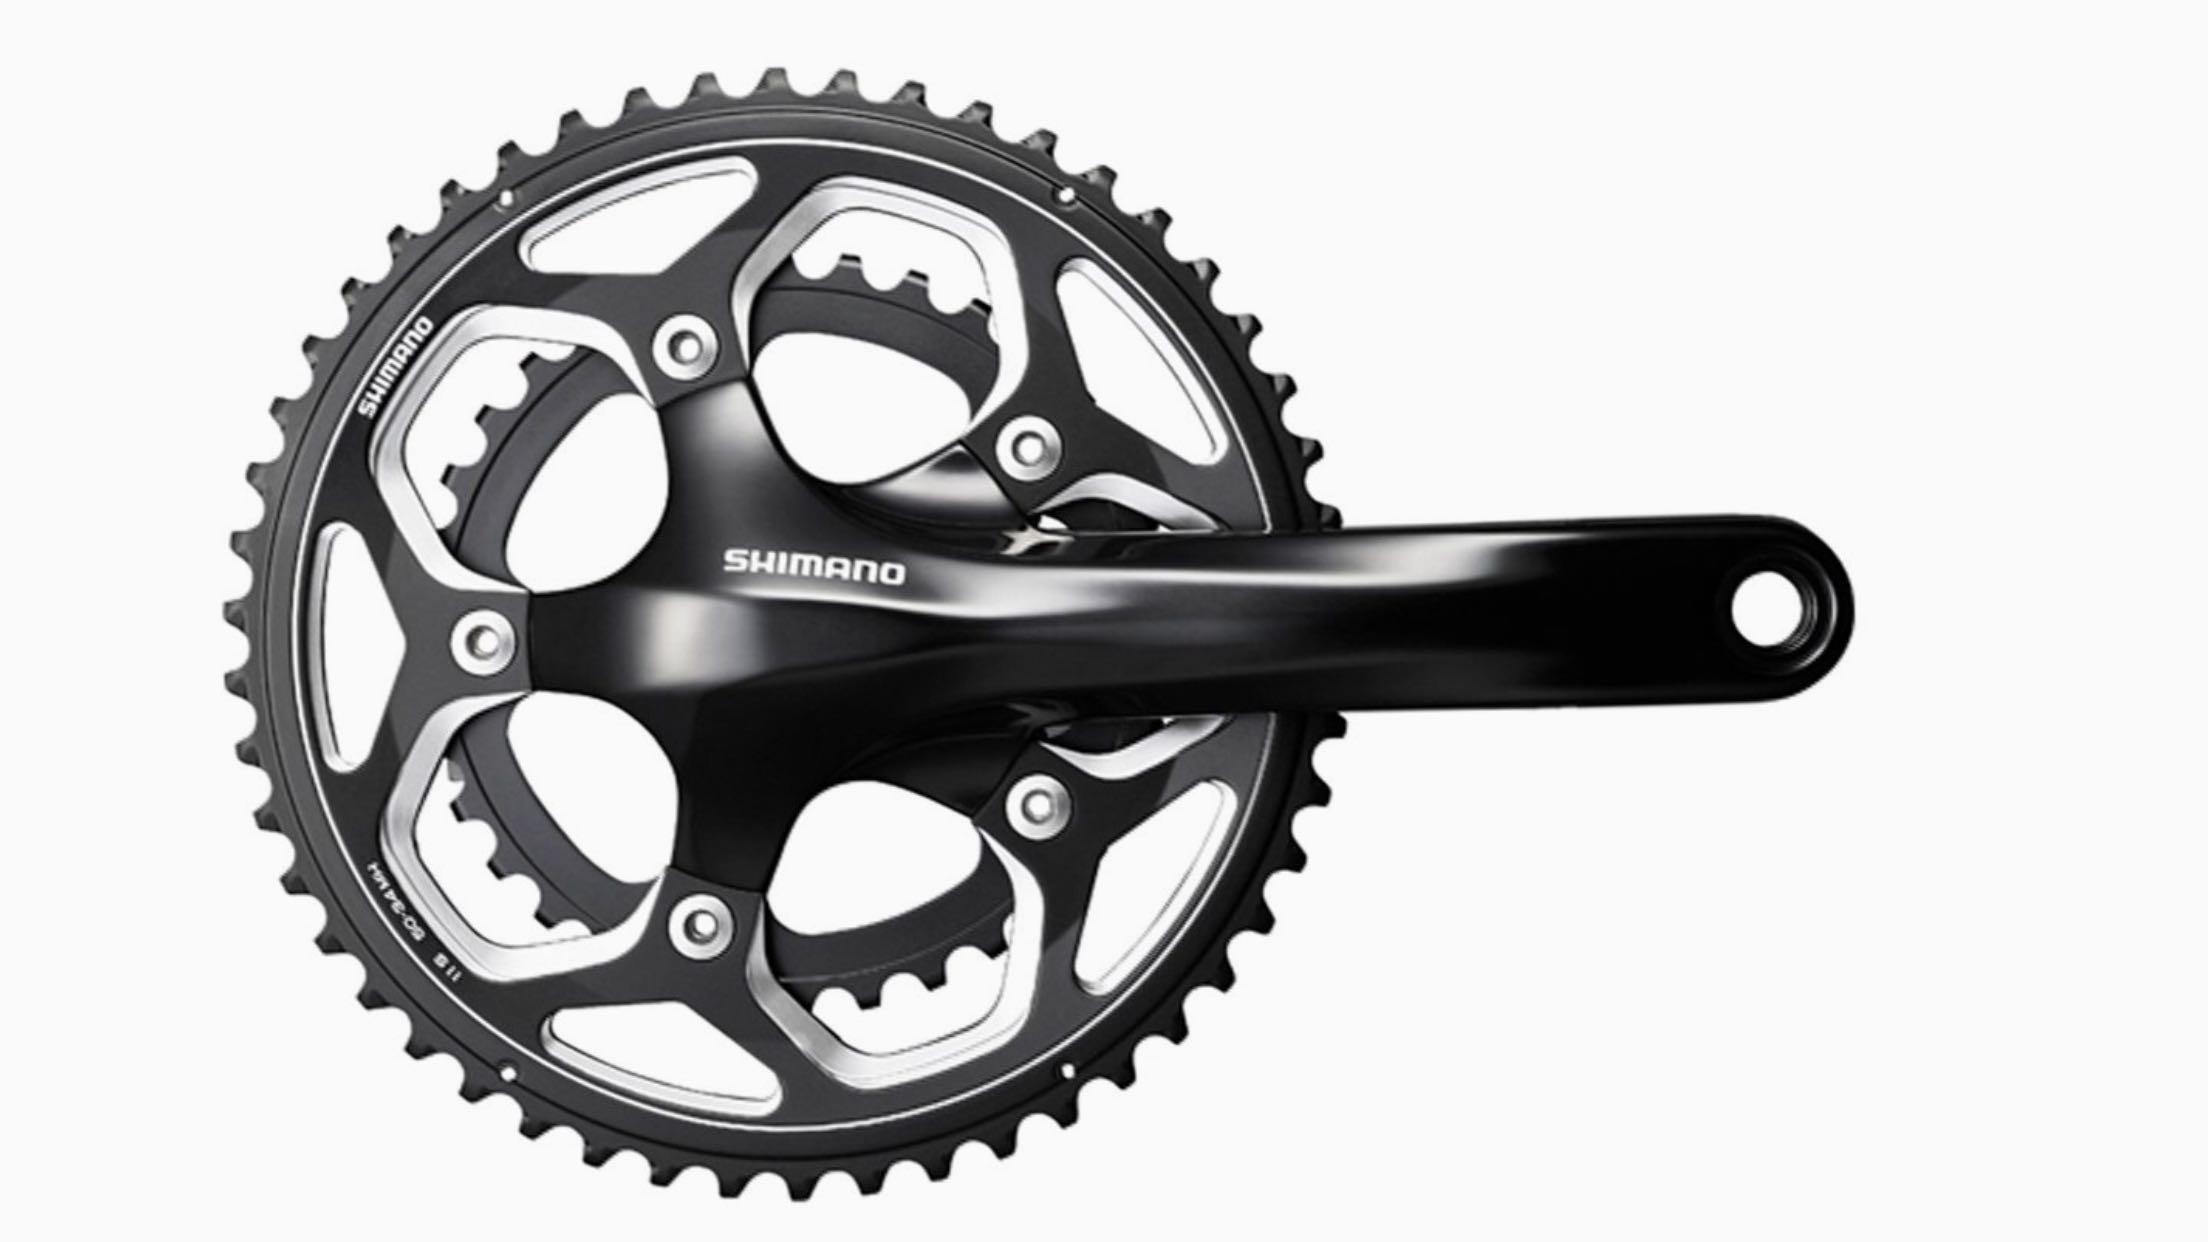 New Shimano RS500 crankset, Sports Equipment, Bicycles & Accessories on Carousell